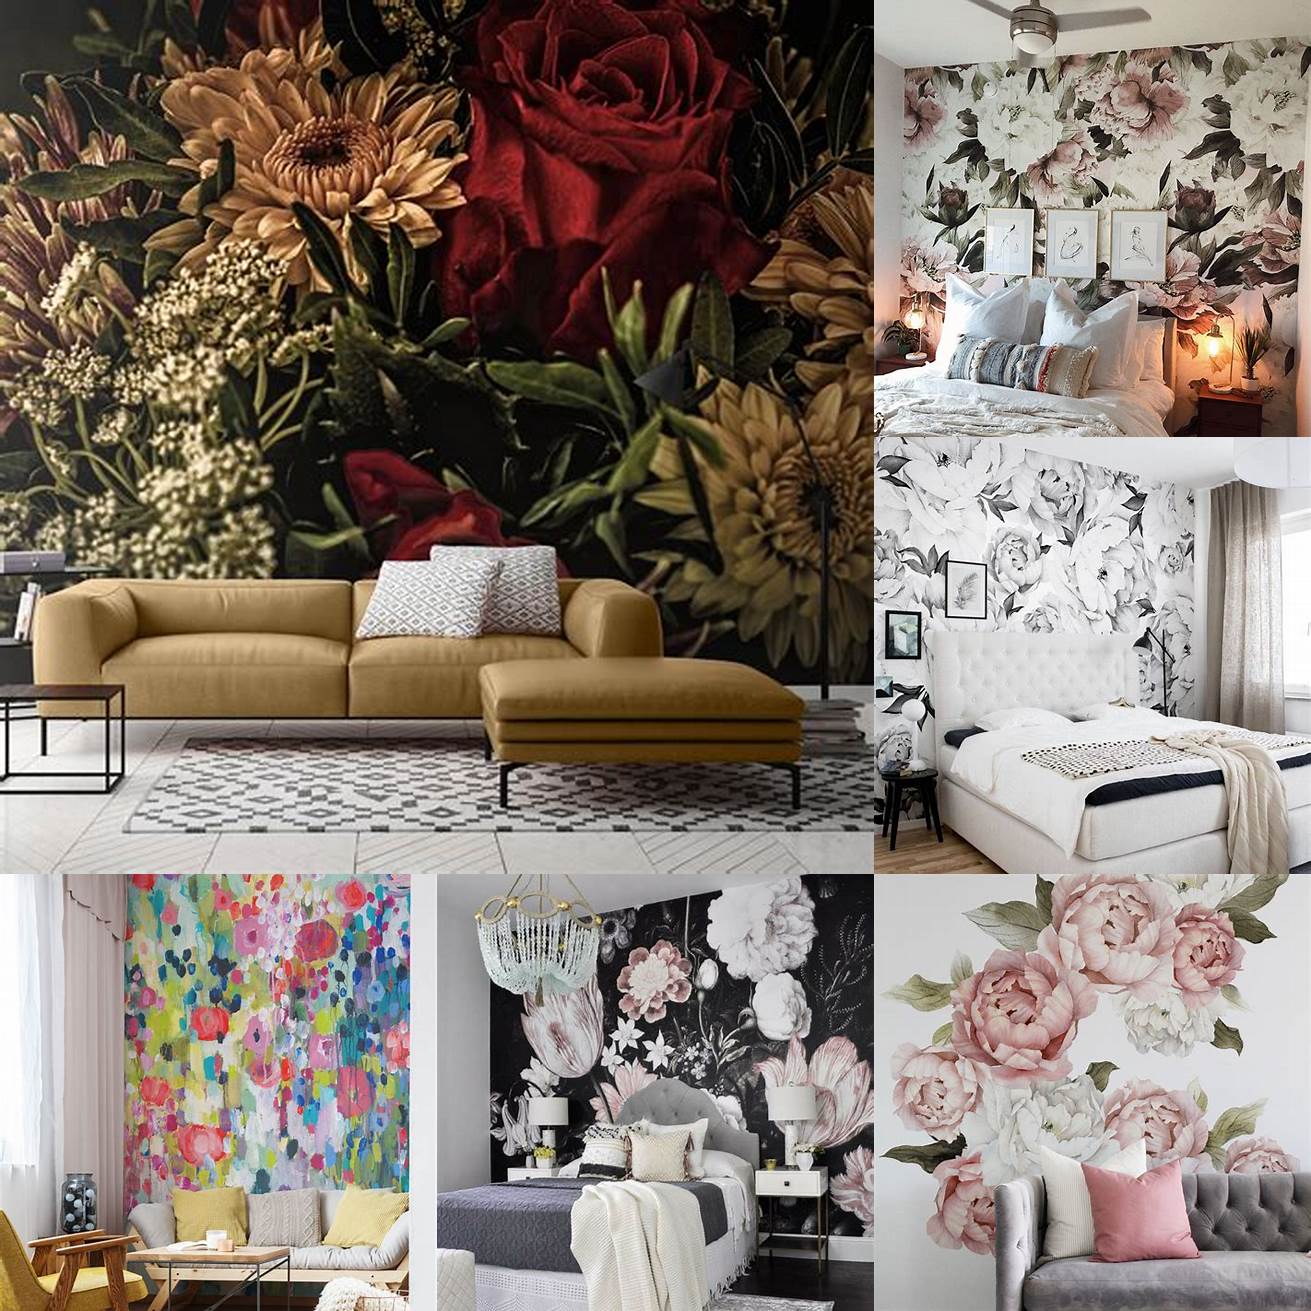 Make a statement with a bold accent wall like this floral wallpaper